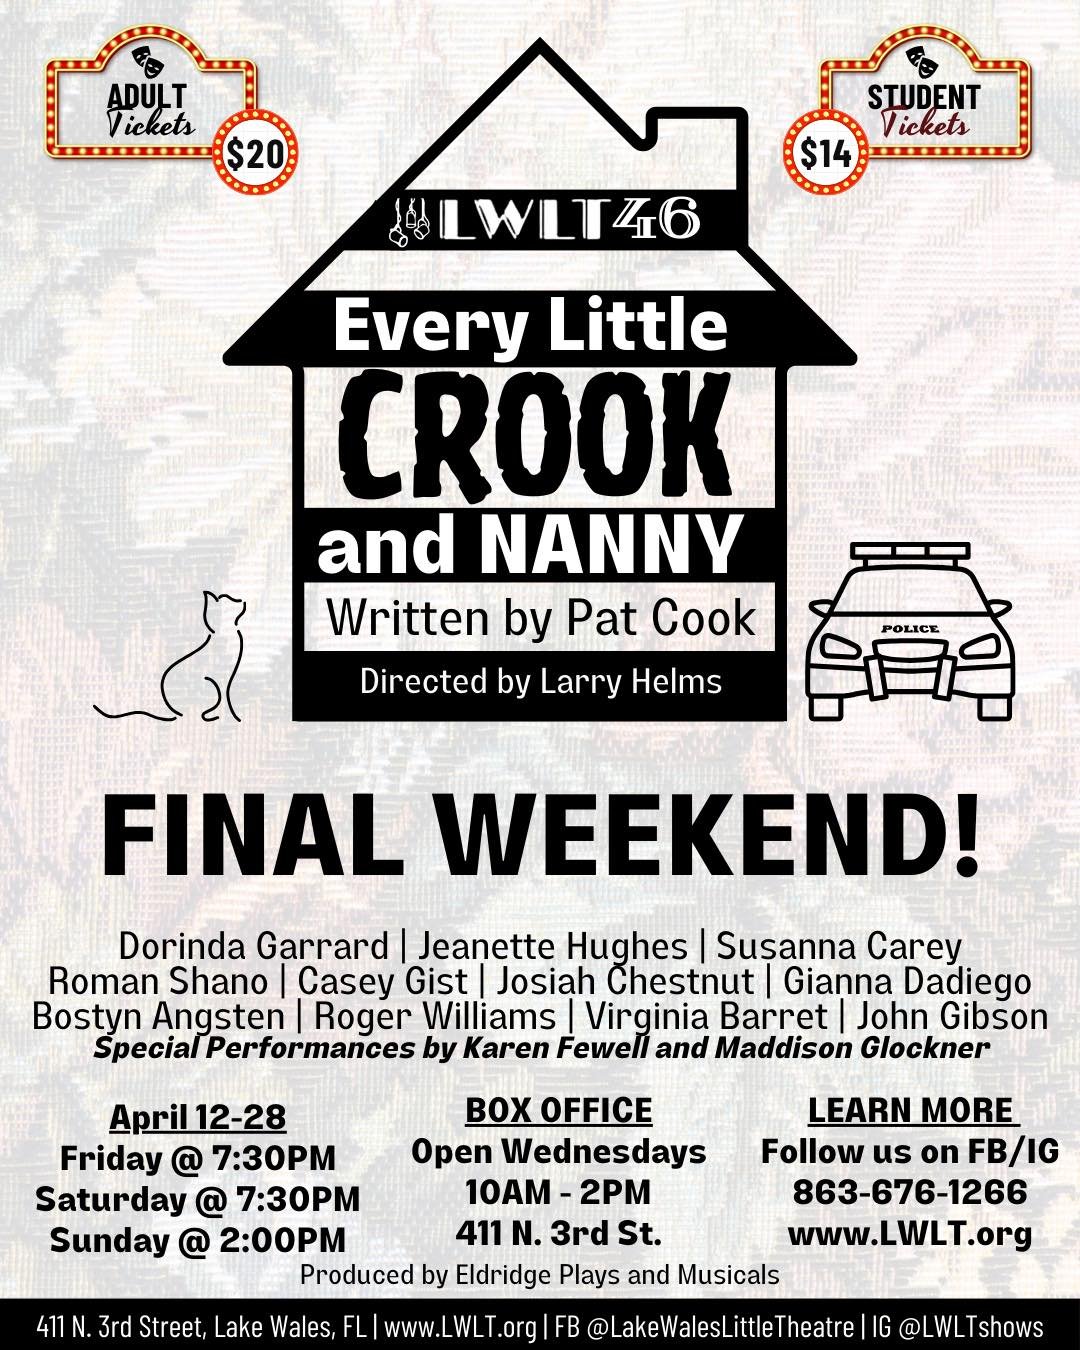 The FINAL weekend of &ldquo;Every Little Crook and Nanny&rdquo; begins TONIGHT! Be sure to buy your tickets before it&rsquo;s GONE! 😱

Show Dates: April 12 - 28, 2024
Order Online: www.LWLT.org
Box Office: 863-676-1266

Plot: In the spirit of Frank 